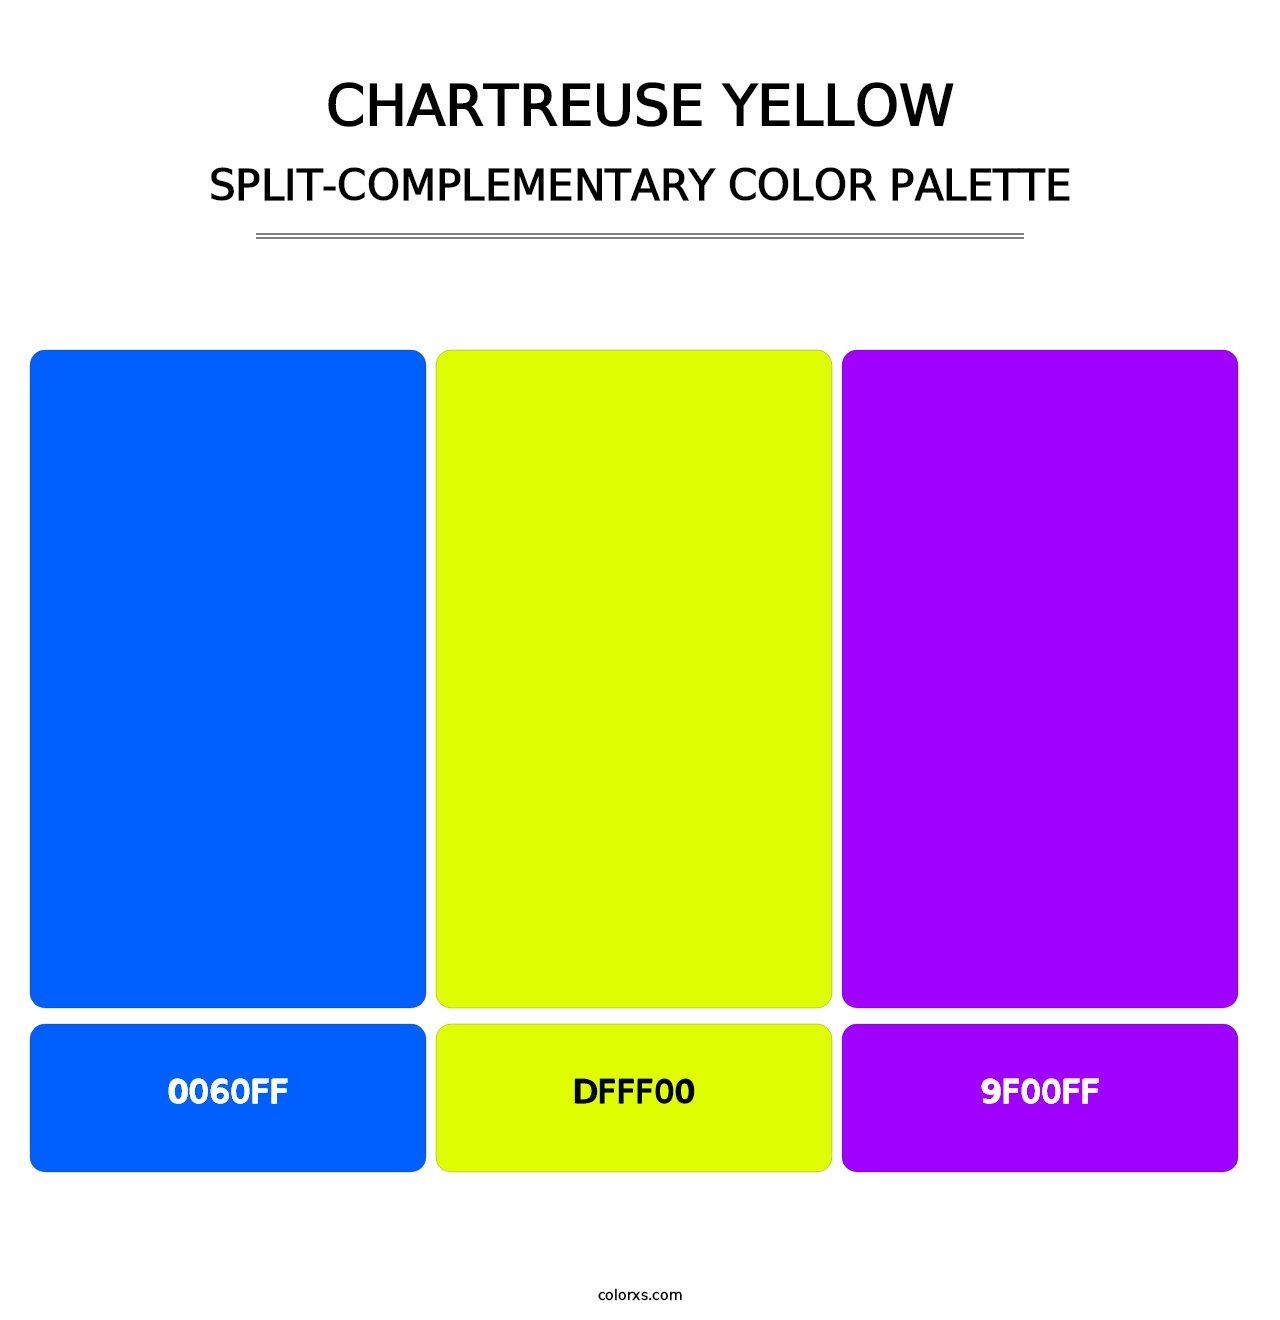 Chartreuse Yellow - Split-Complementary Color Palette